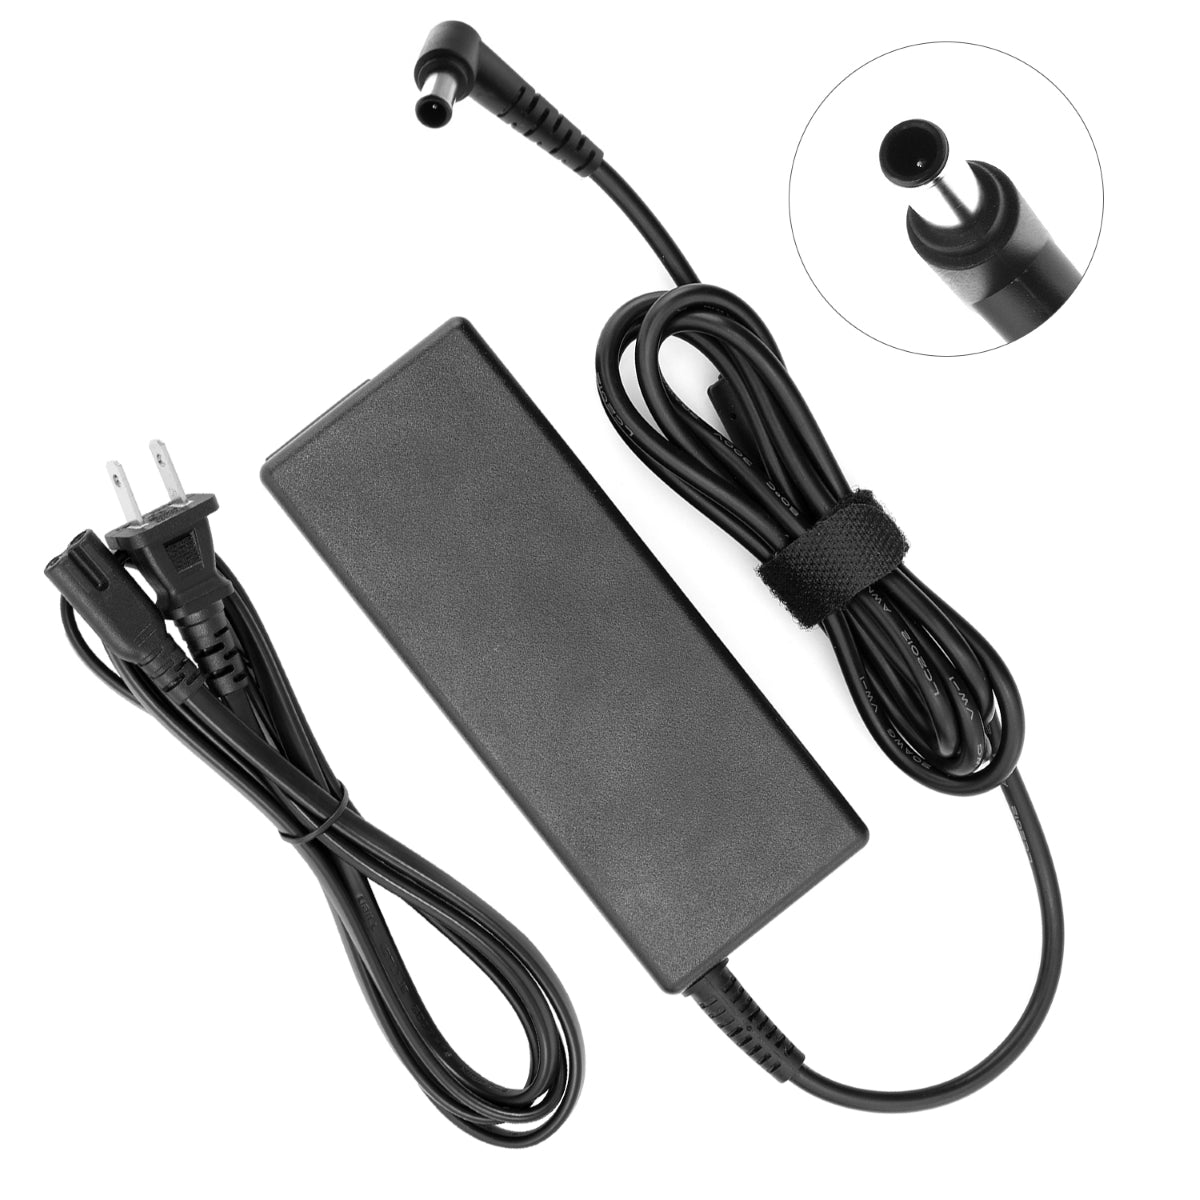 Power Adapter for LG 27MP58VQ-P Monitor TV